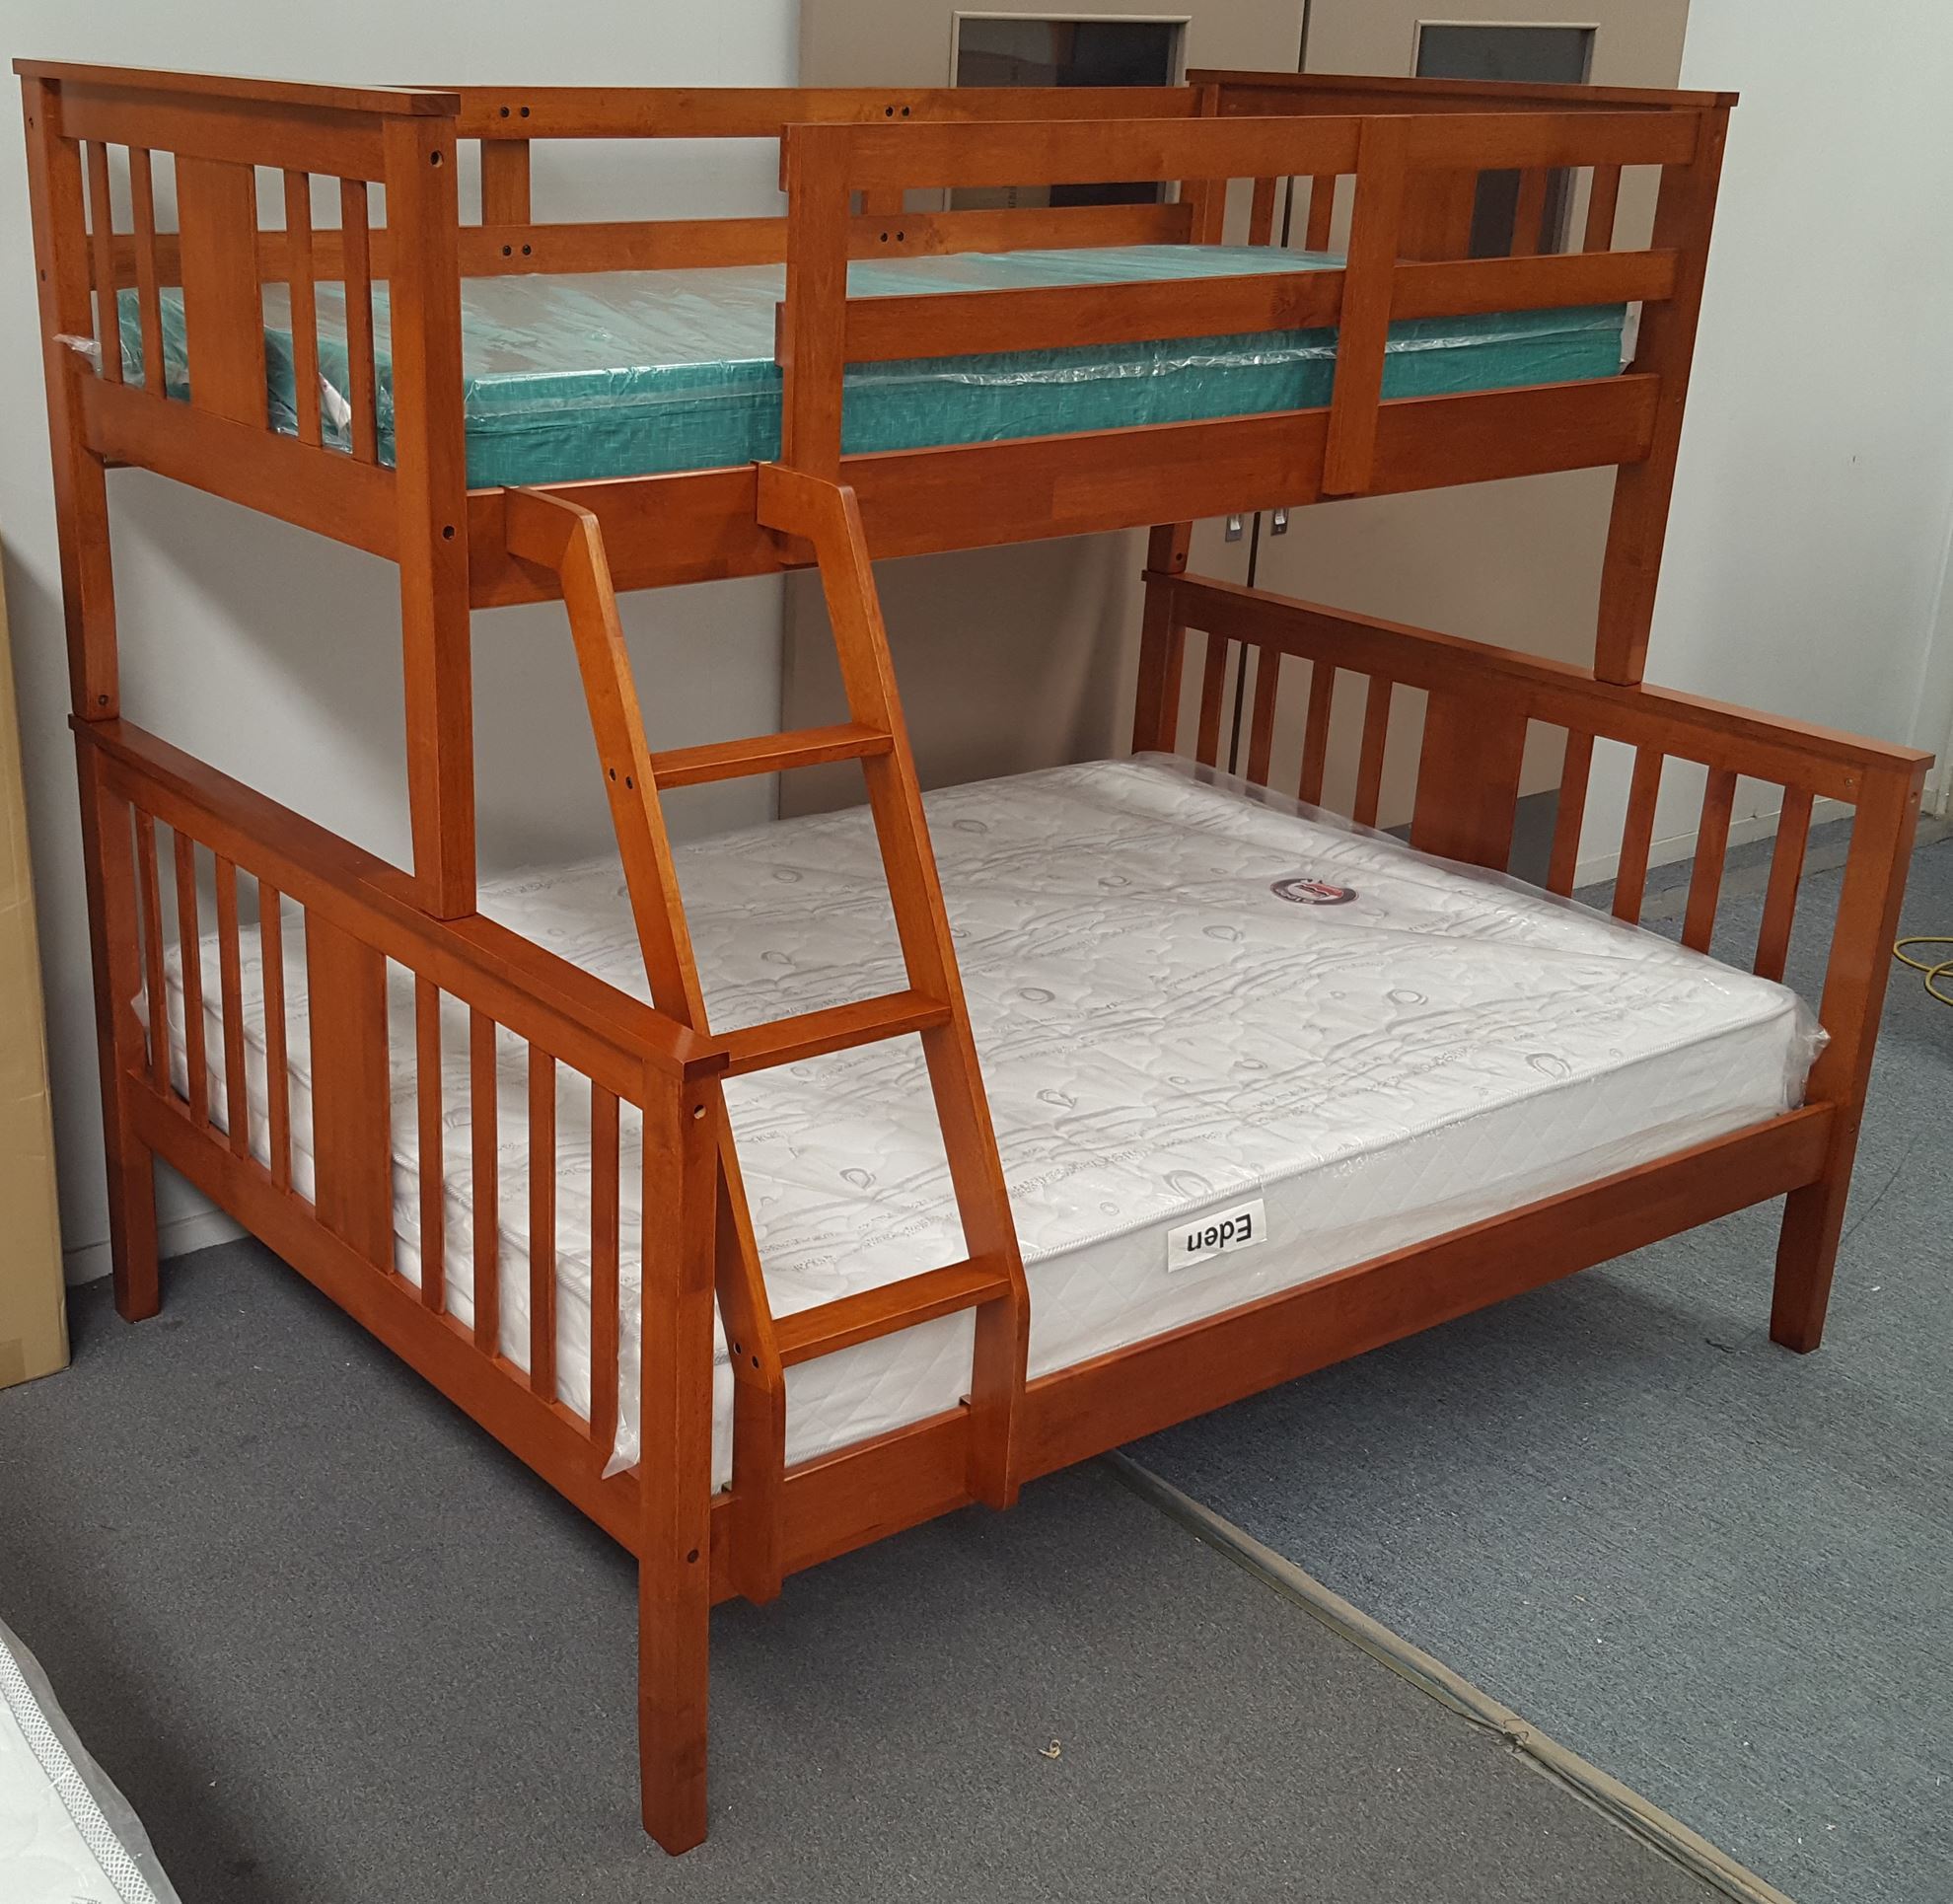 Holly Single Double Bunk Bed, Cherry Oak Bunk Beds